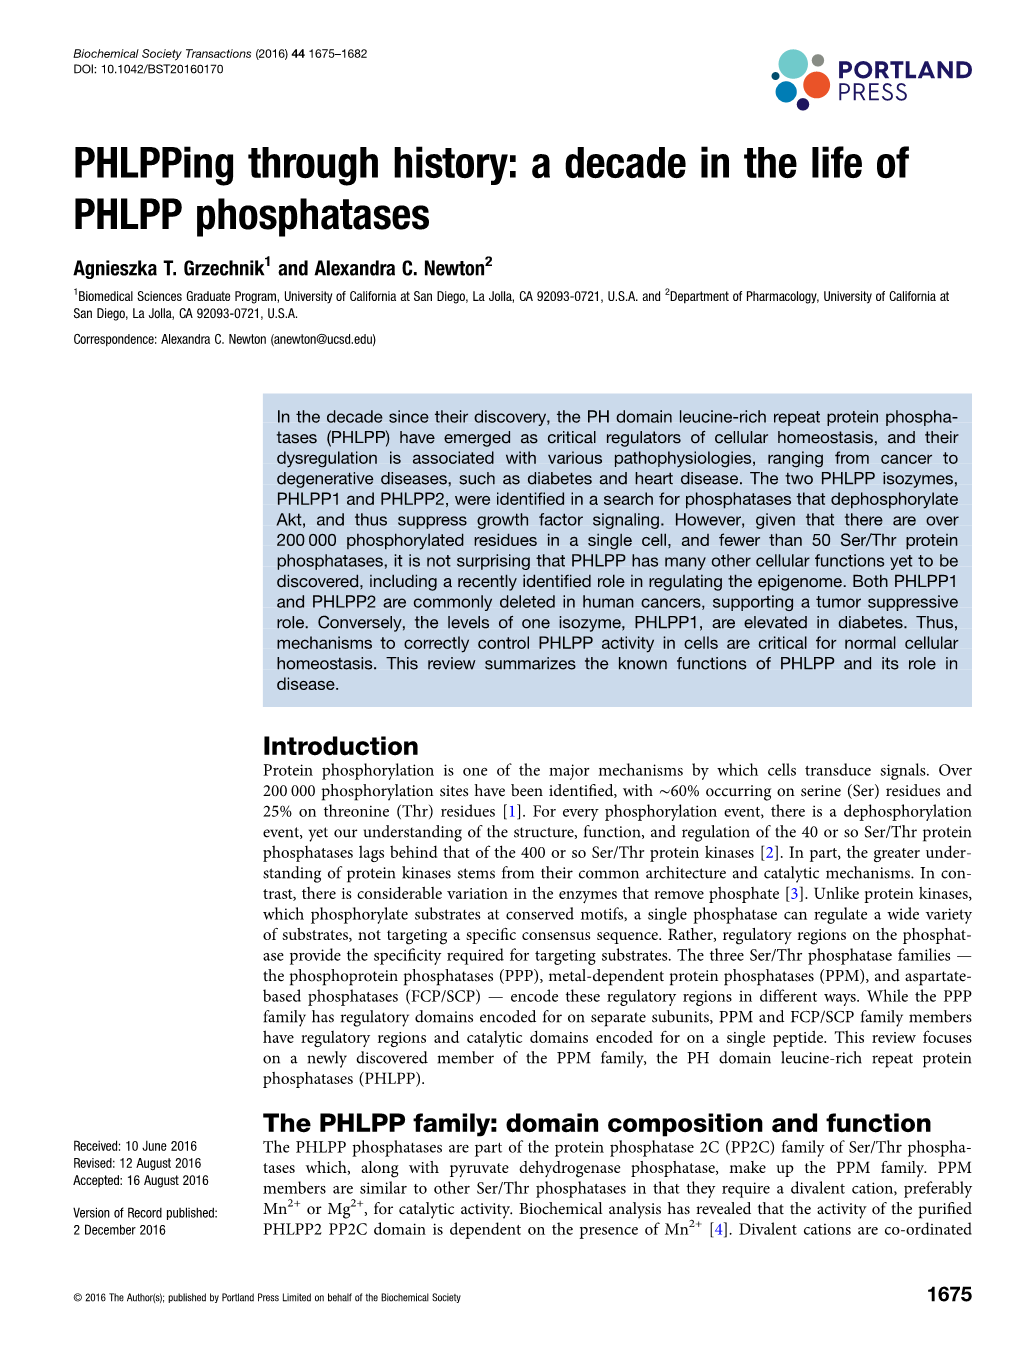 Phlpping Through History: a Decade in the Life of PHLPP Phosphatases